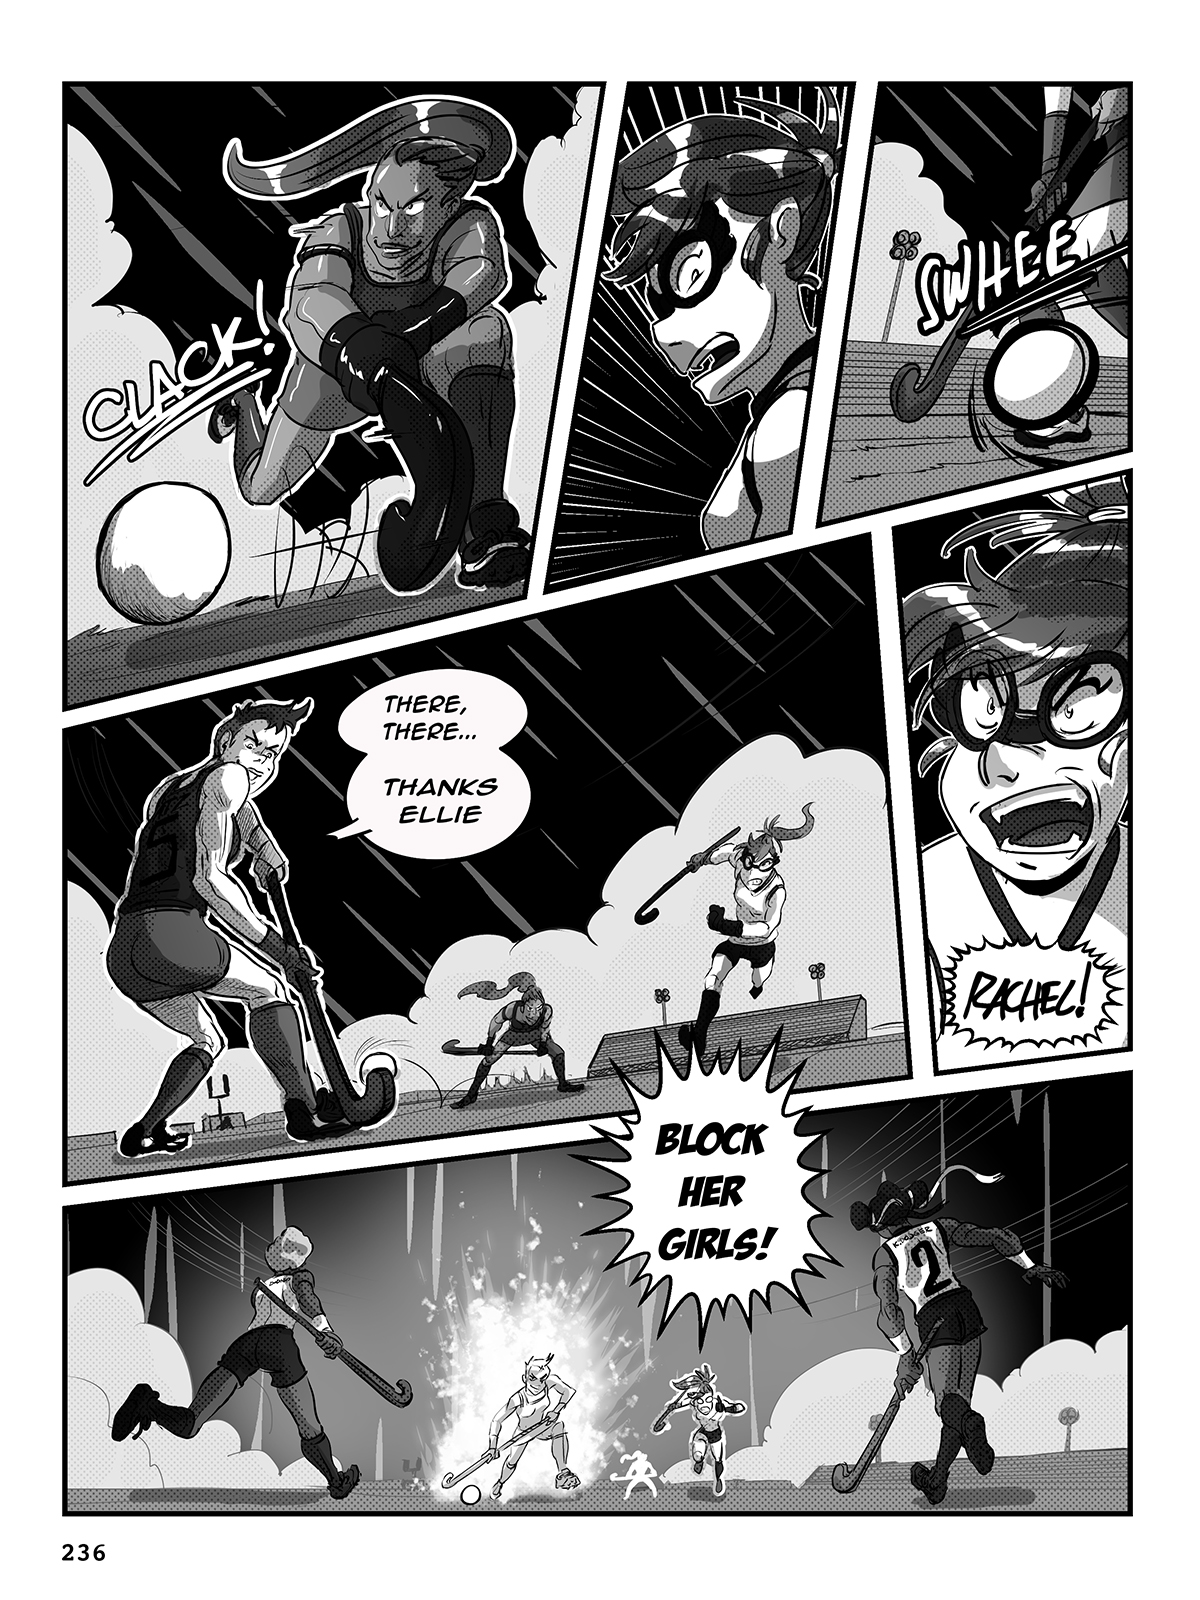 Hockey, Love, & GUTS! – Chapter 9 – Page 236